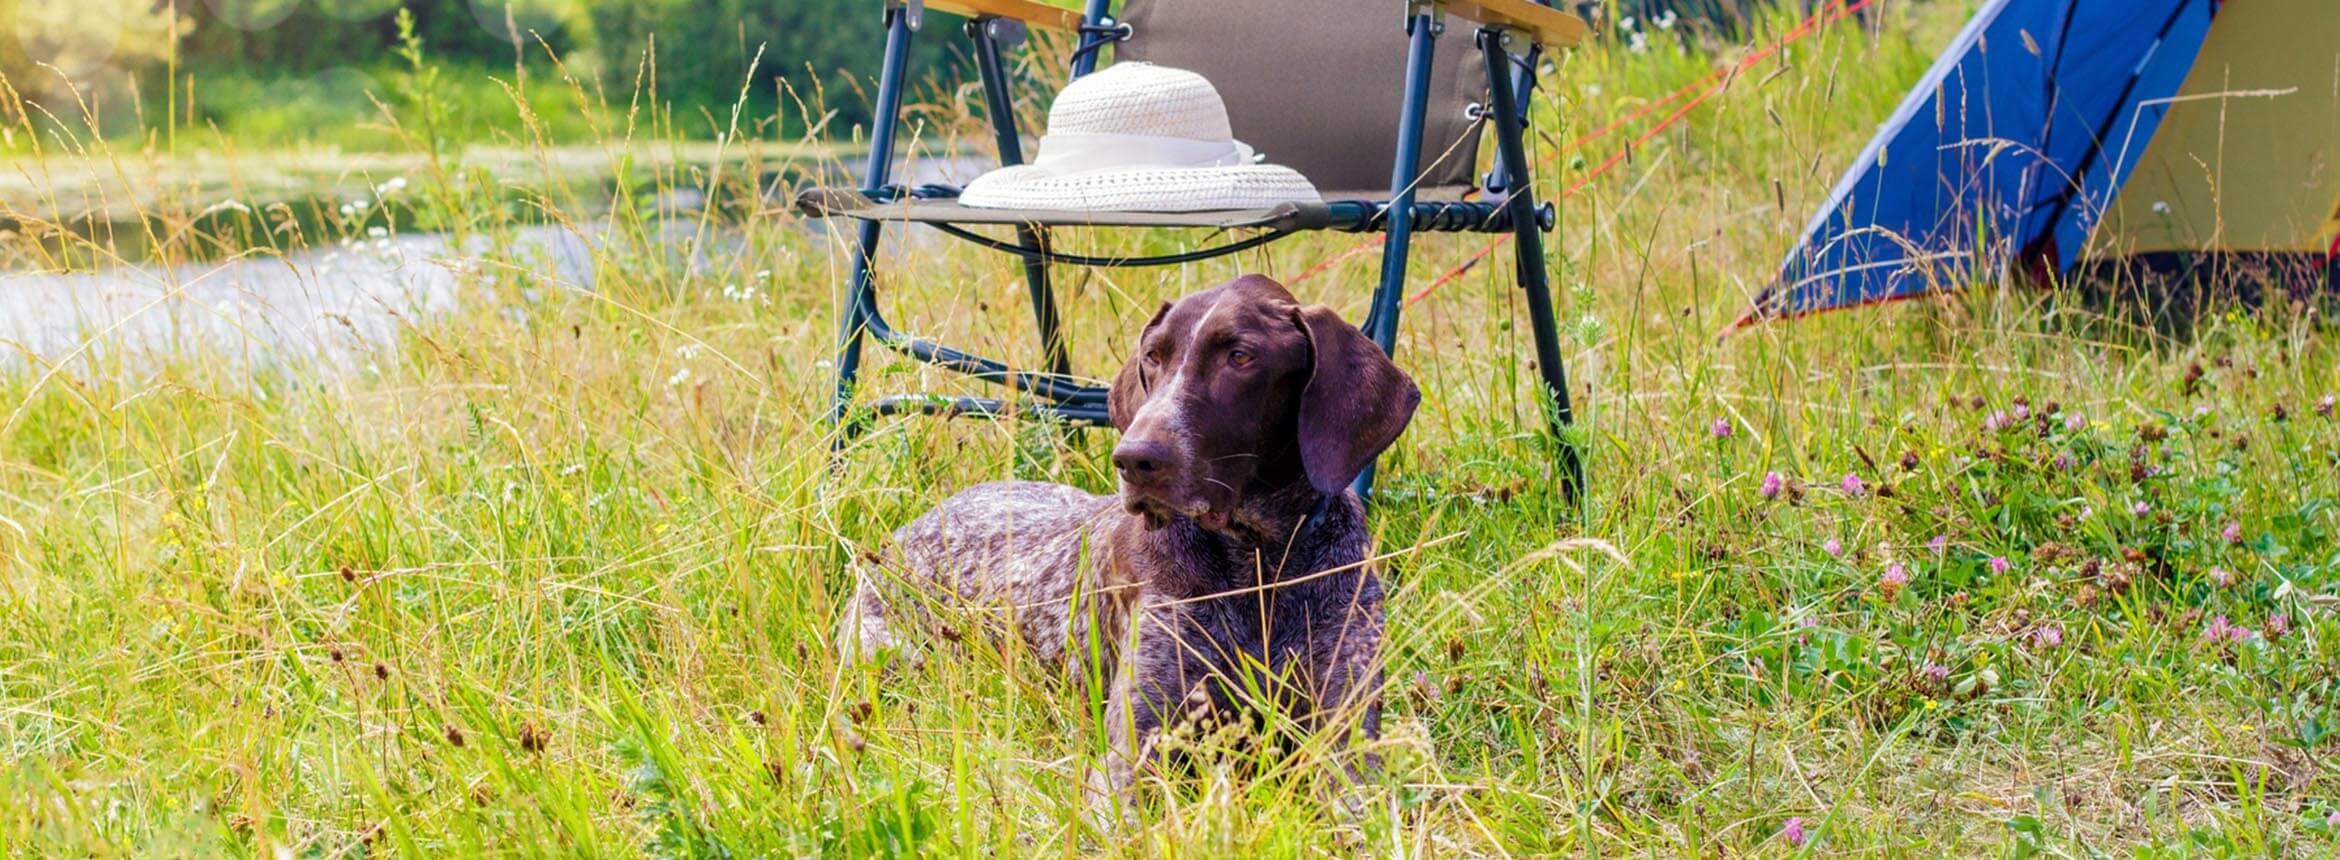 image of dog in field with a lawn chair